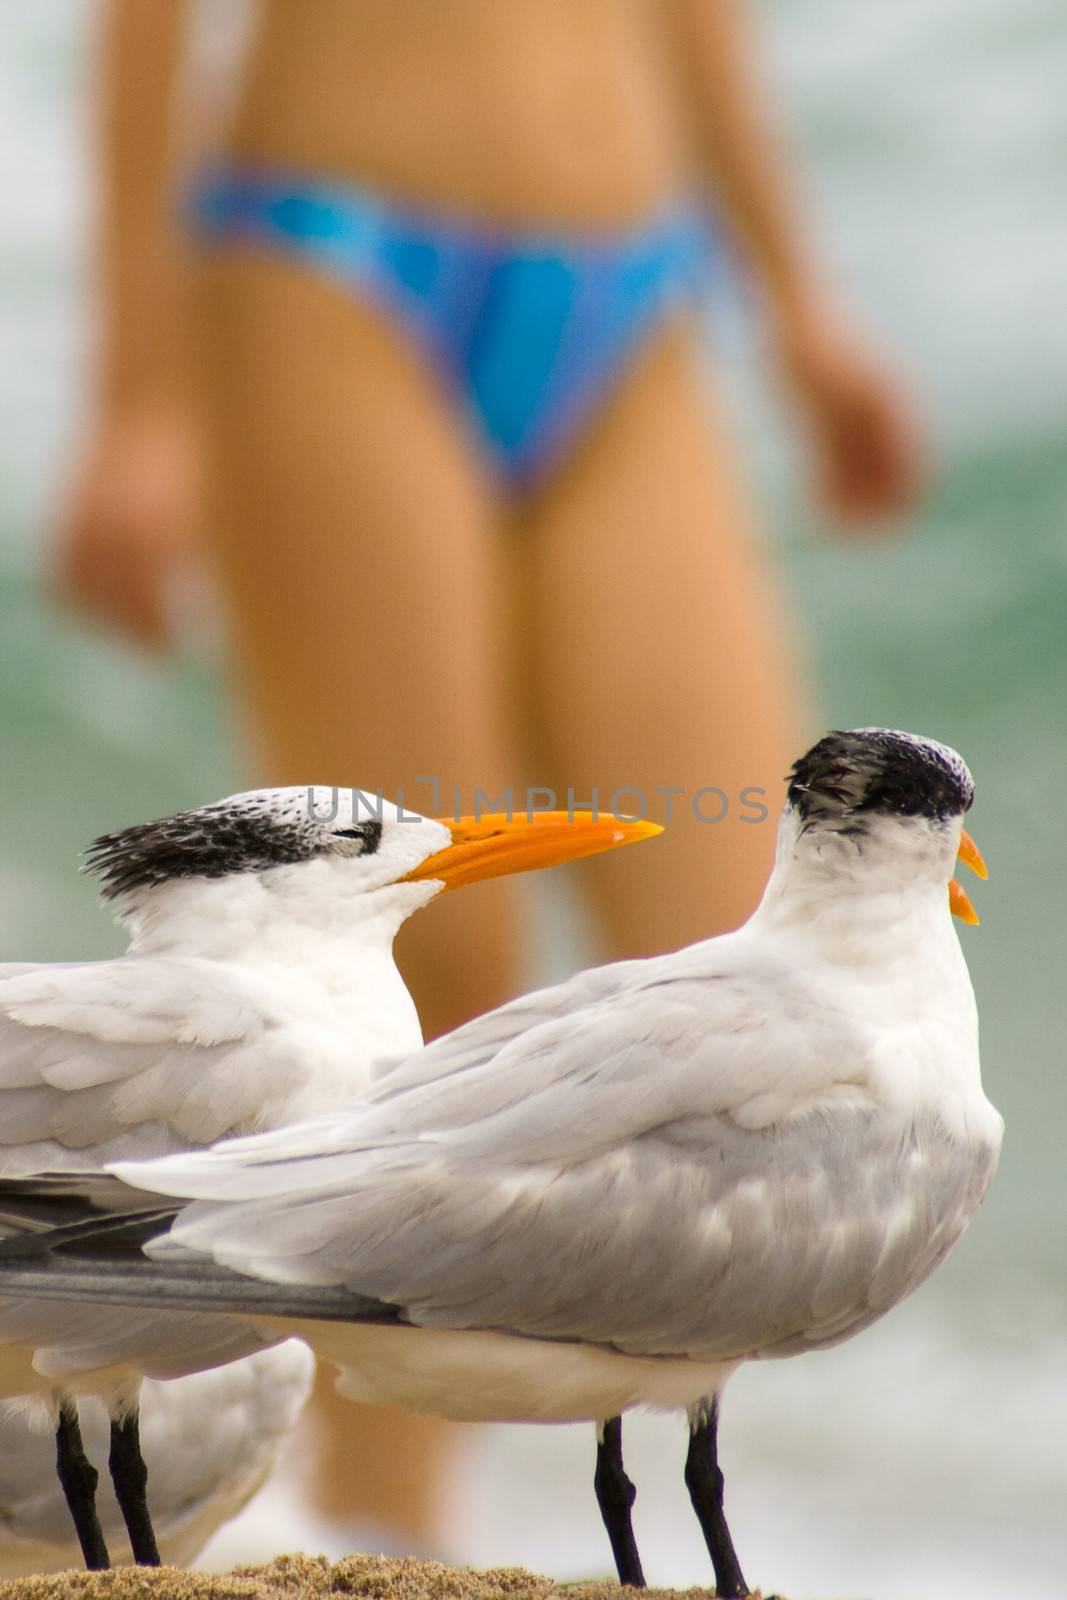 Close-up of seagulls with a woman in the background, Miami, Miami-Dade County, Florida, USA